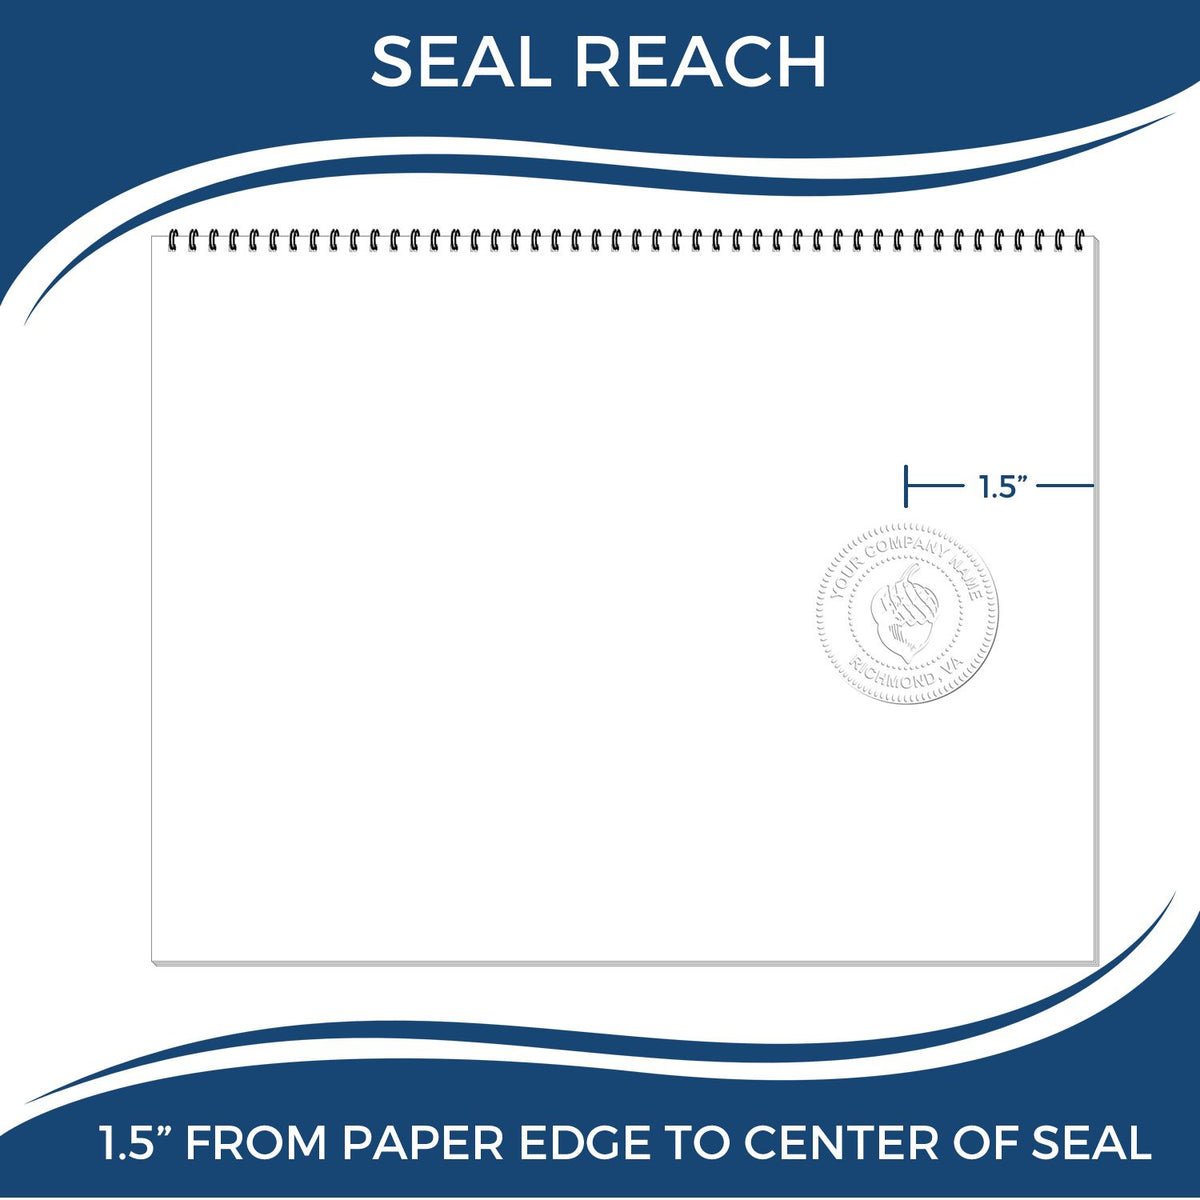 An infographic showing the seal reach which is represented by a ruler and a miniature seal image of the Gift Nebraska Engineer Seal